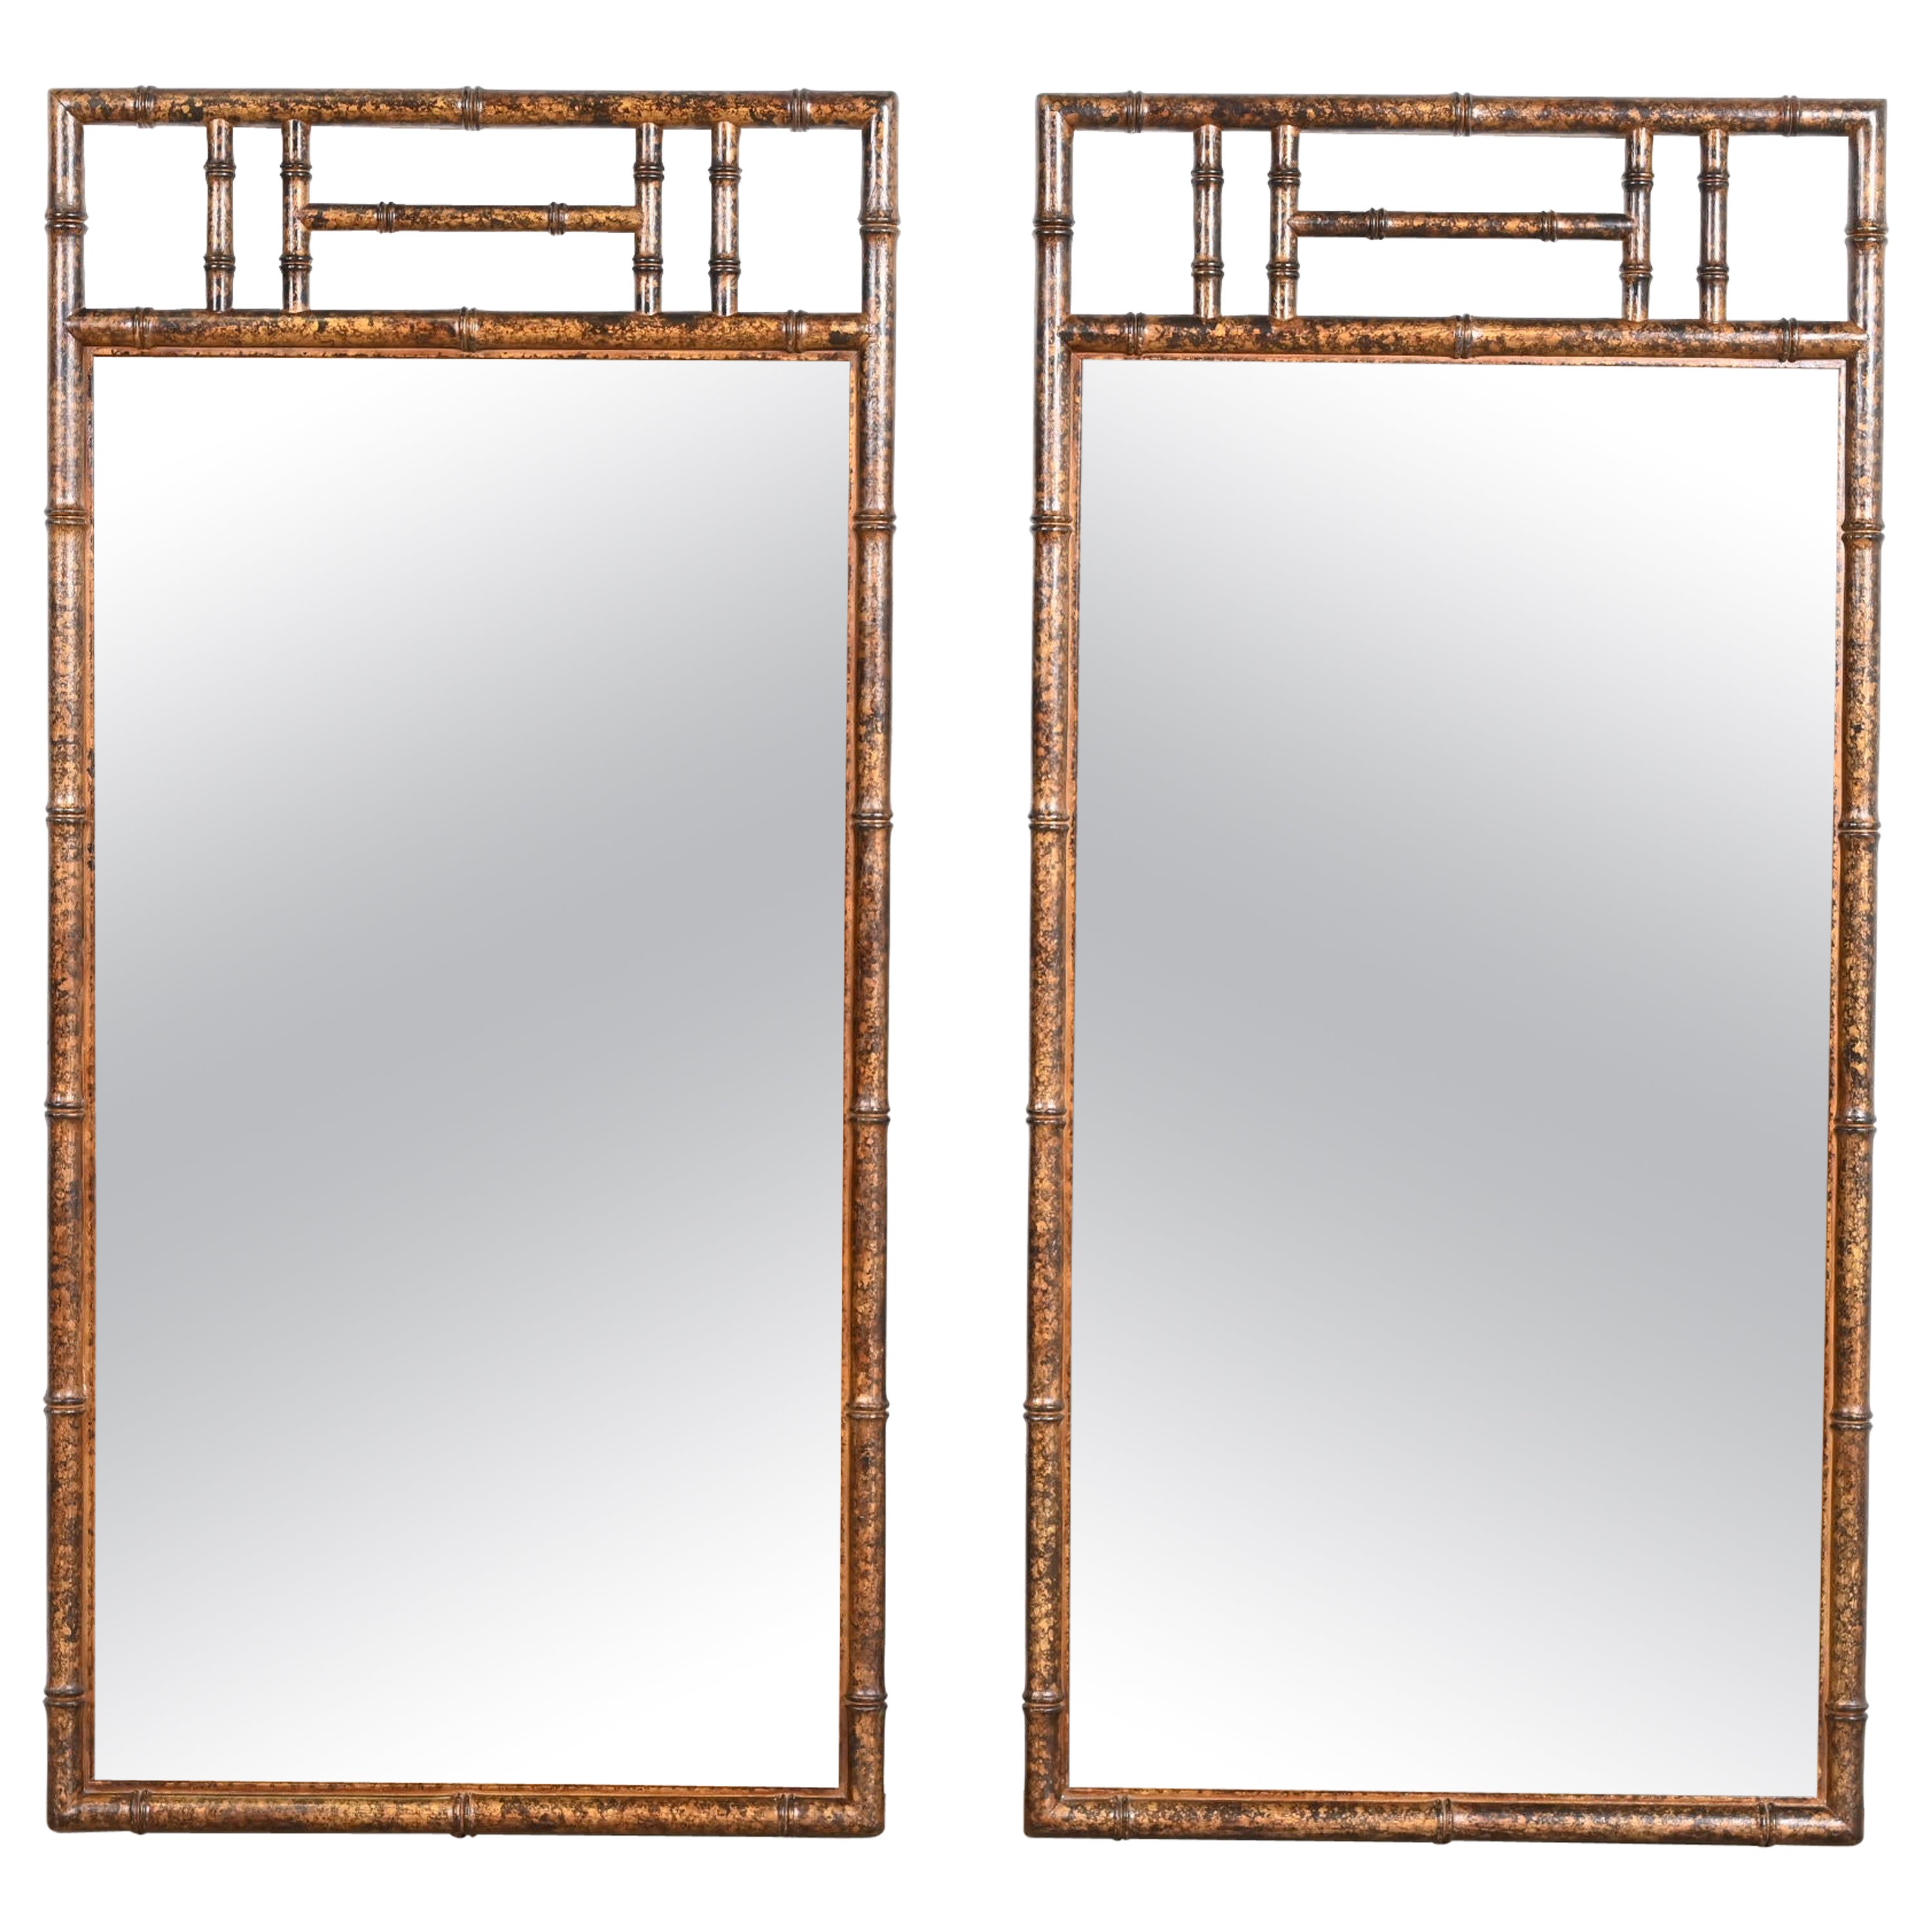 Drexel Heritage Hollywood Regency Faux Bamboo Mirrors in Faux Tortoise Finish